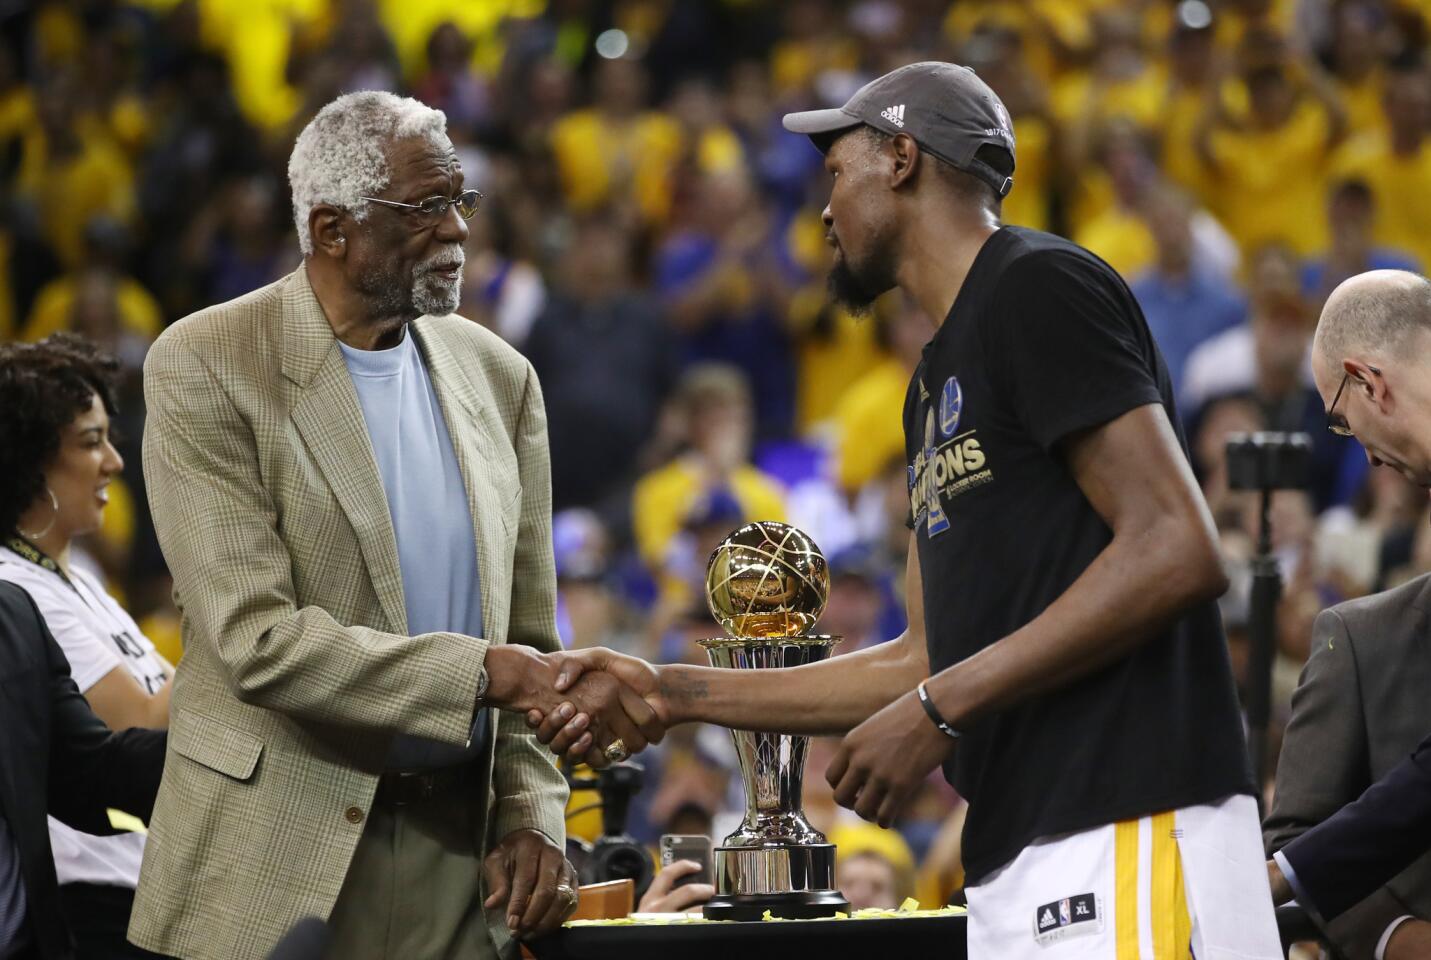 OAKLAND, CA - JUNE 12: Kevin Durant #35 of the Golden State Warriors is presented the Bill Russell NBA Finals Most Valuable Player Trophy by NBA Hall of Famer Bill Russell after defeating the Cleveland Cavaliers 129-120 in Game 5 to win the 2017 NBA Finals at ORACLE Arena on June 12, 2017 in Oakland, California. NOTE TO USER: User expressly acknowledges and agrees that, by downloading and or using this photograph, User is consenting to the terms and conditions of the Getty Images License Agreement. (Photo by Ezra Shaw/Getty Images) ** OUTS - ELSENT, FPG, CM - OUTS * NM, PH, VA if sourced by CT, LA or MoD **